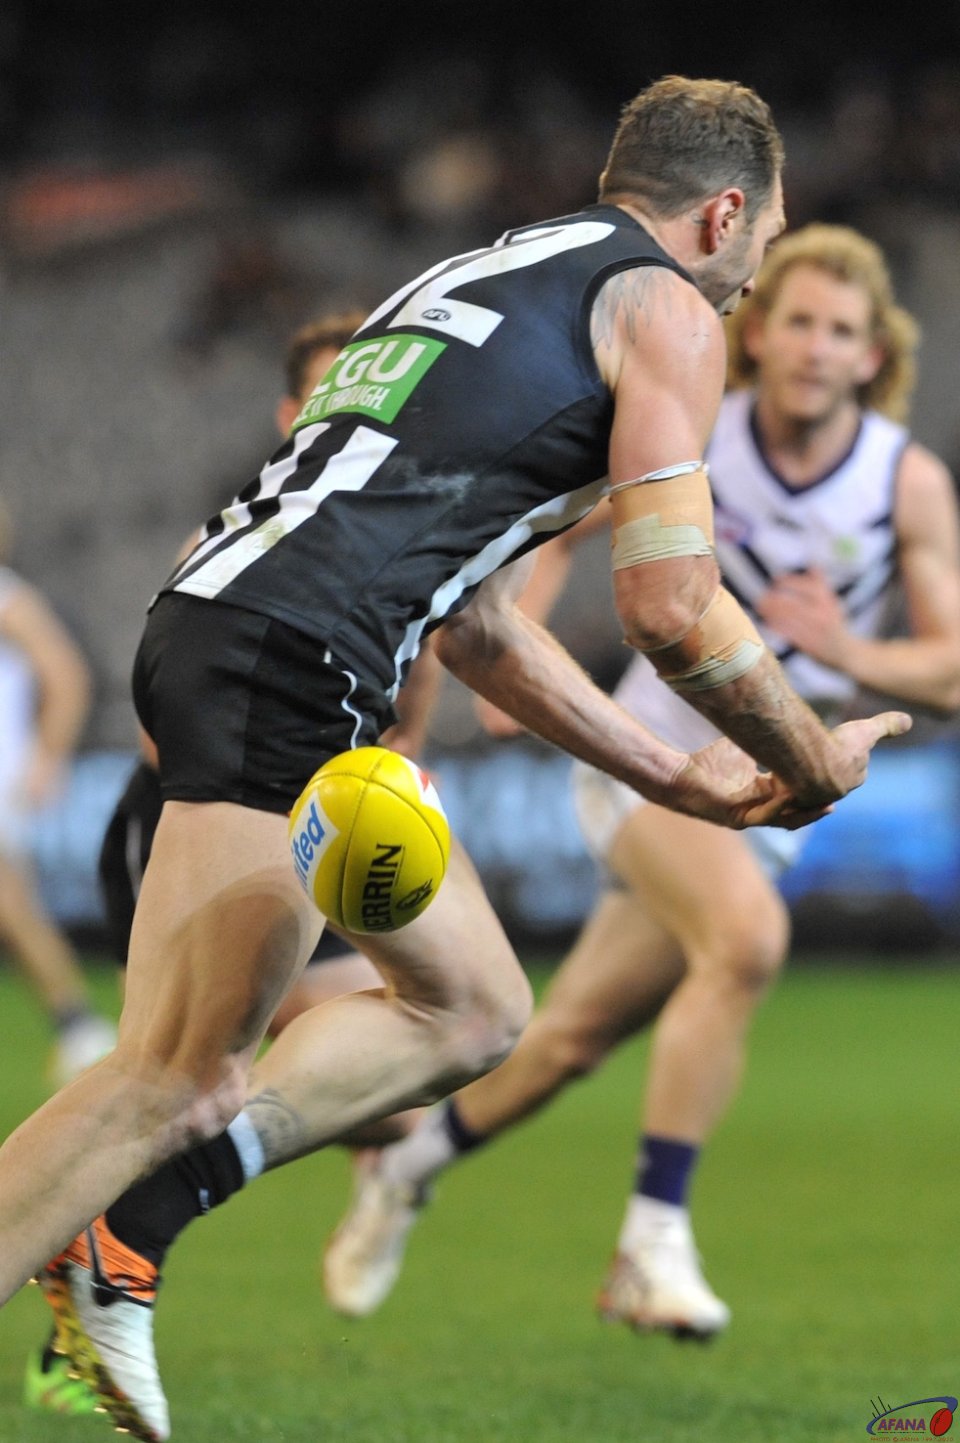 Cloke misses a low ball mark attempt